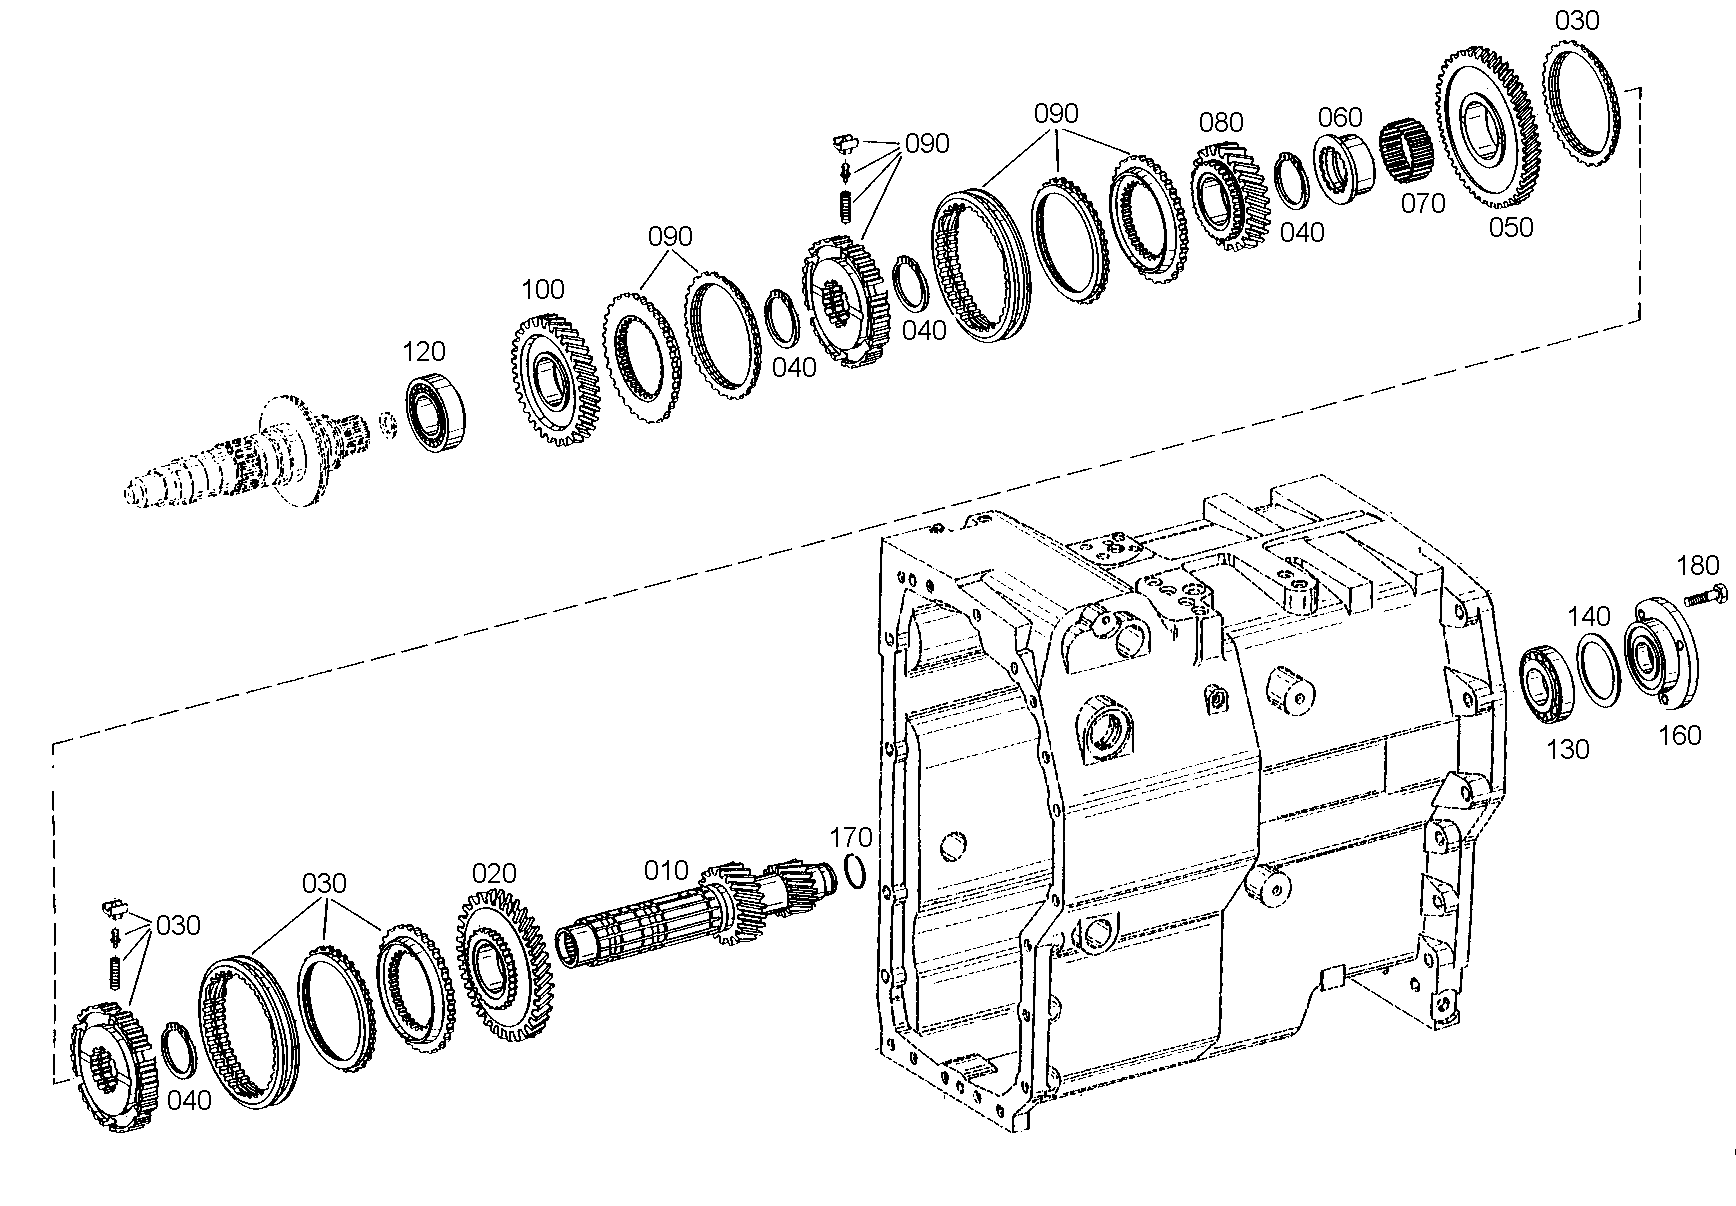 drawing for AGCO F824101080080 - SPRING (figure 1)